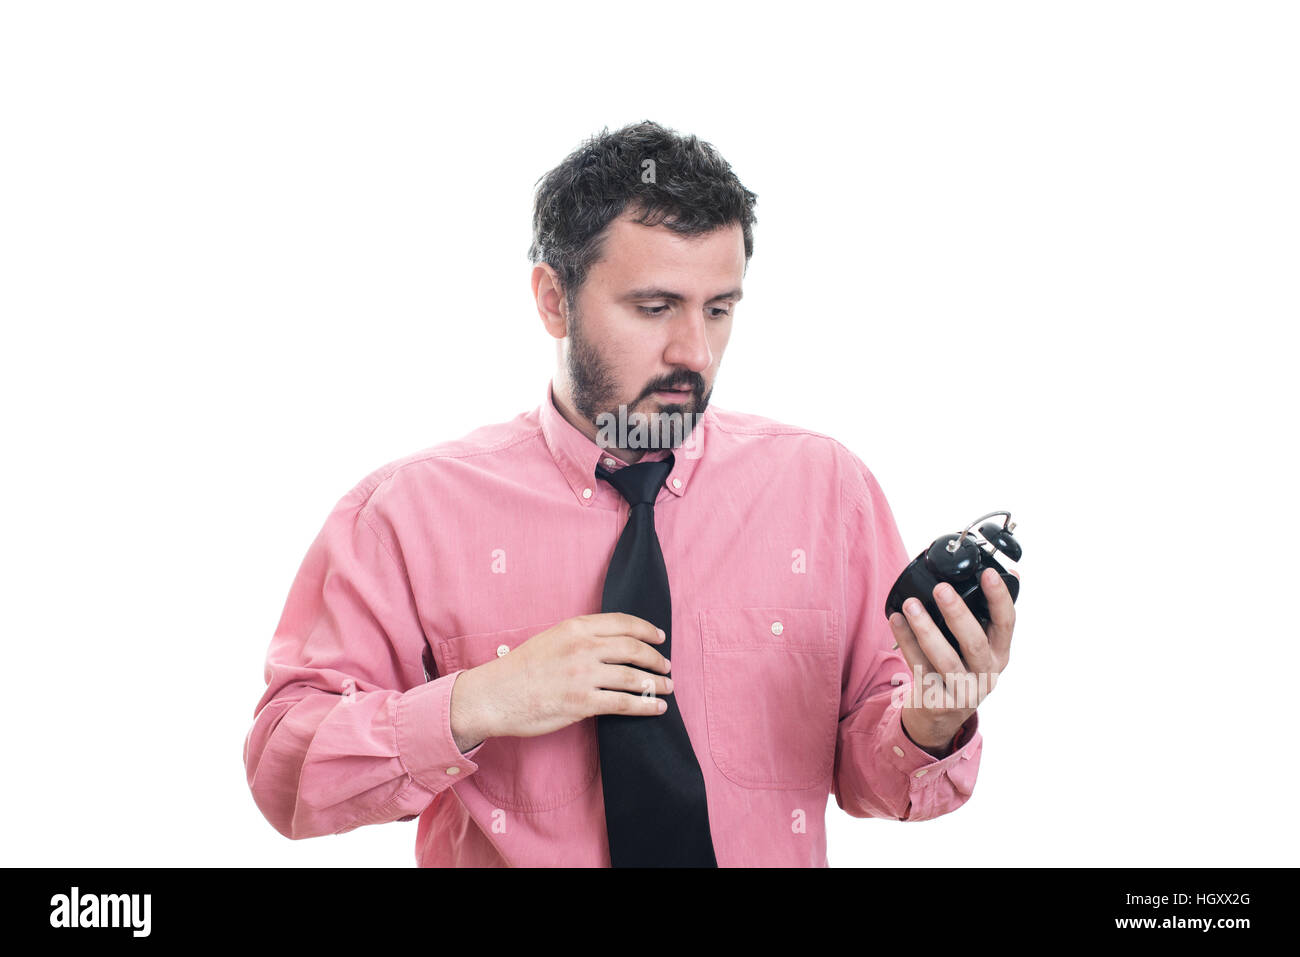 Angry young man holding alarm clock Stock Photo